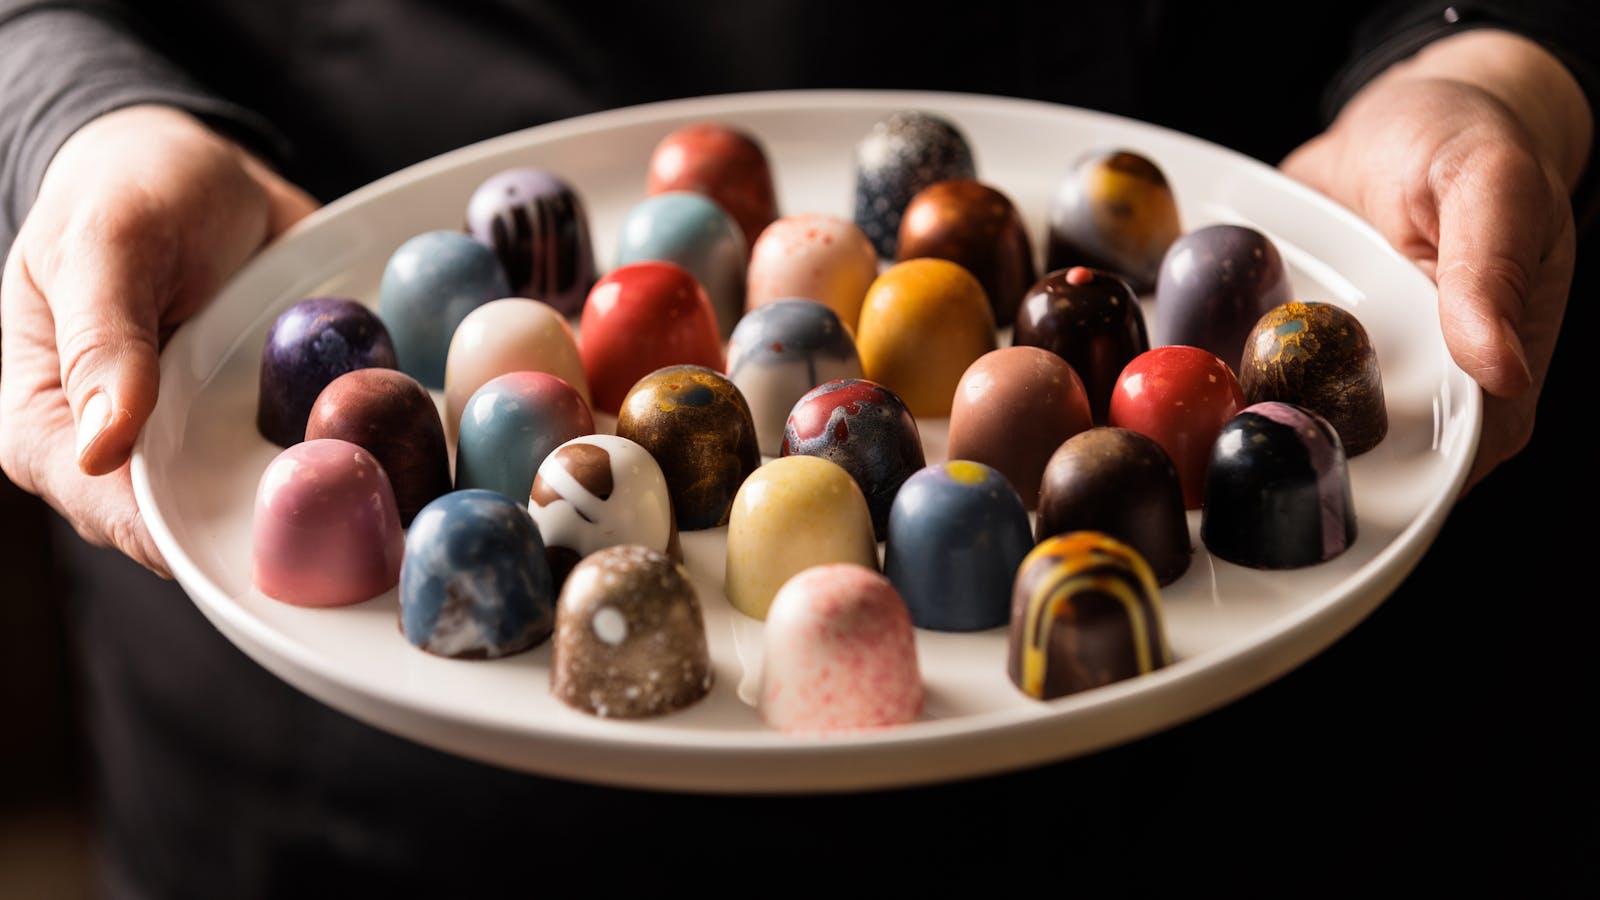 Federation Chocolate also make a large range of unique and flavoursome praline chocolates